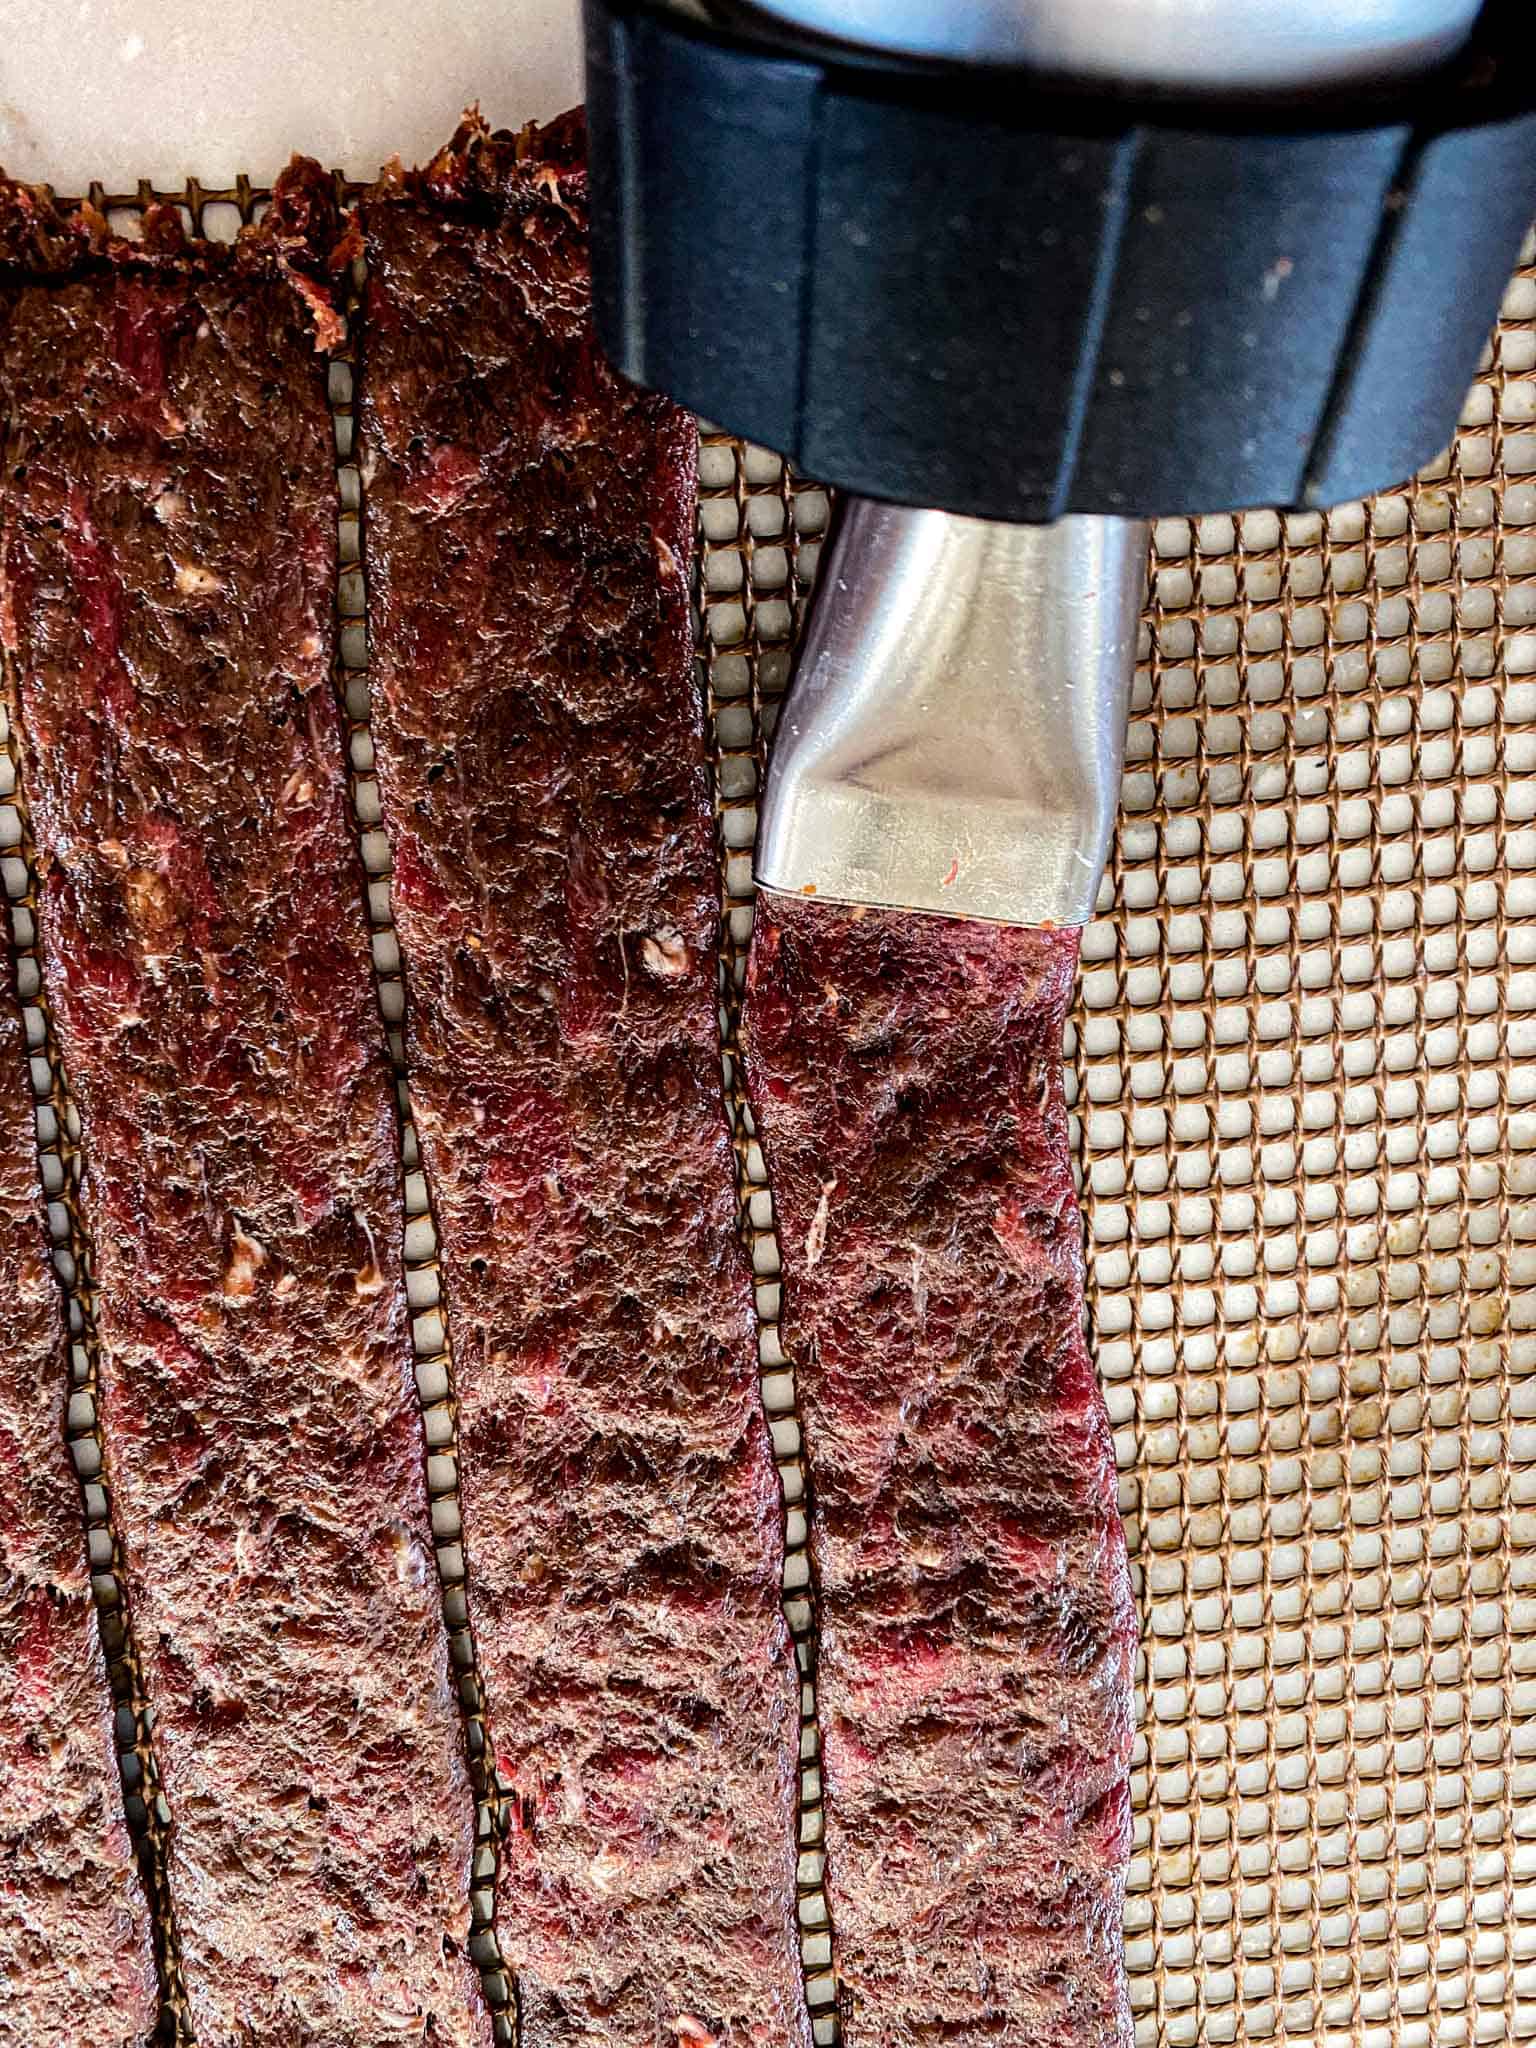 Homemade goose jerky being pressed onto grilling mats with a jerky press.